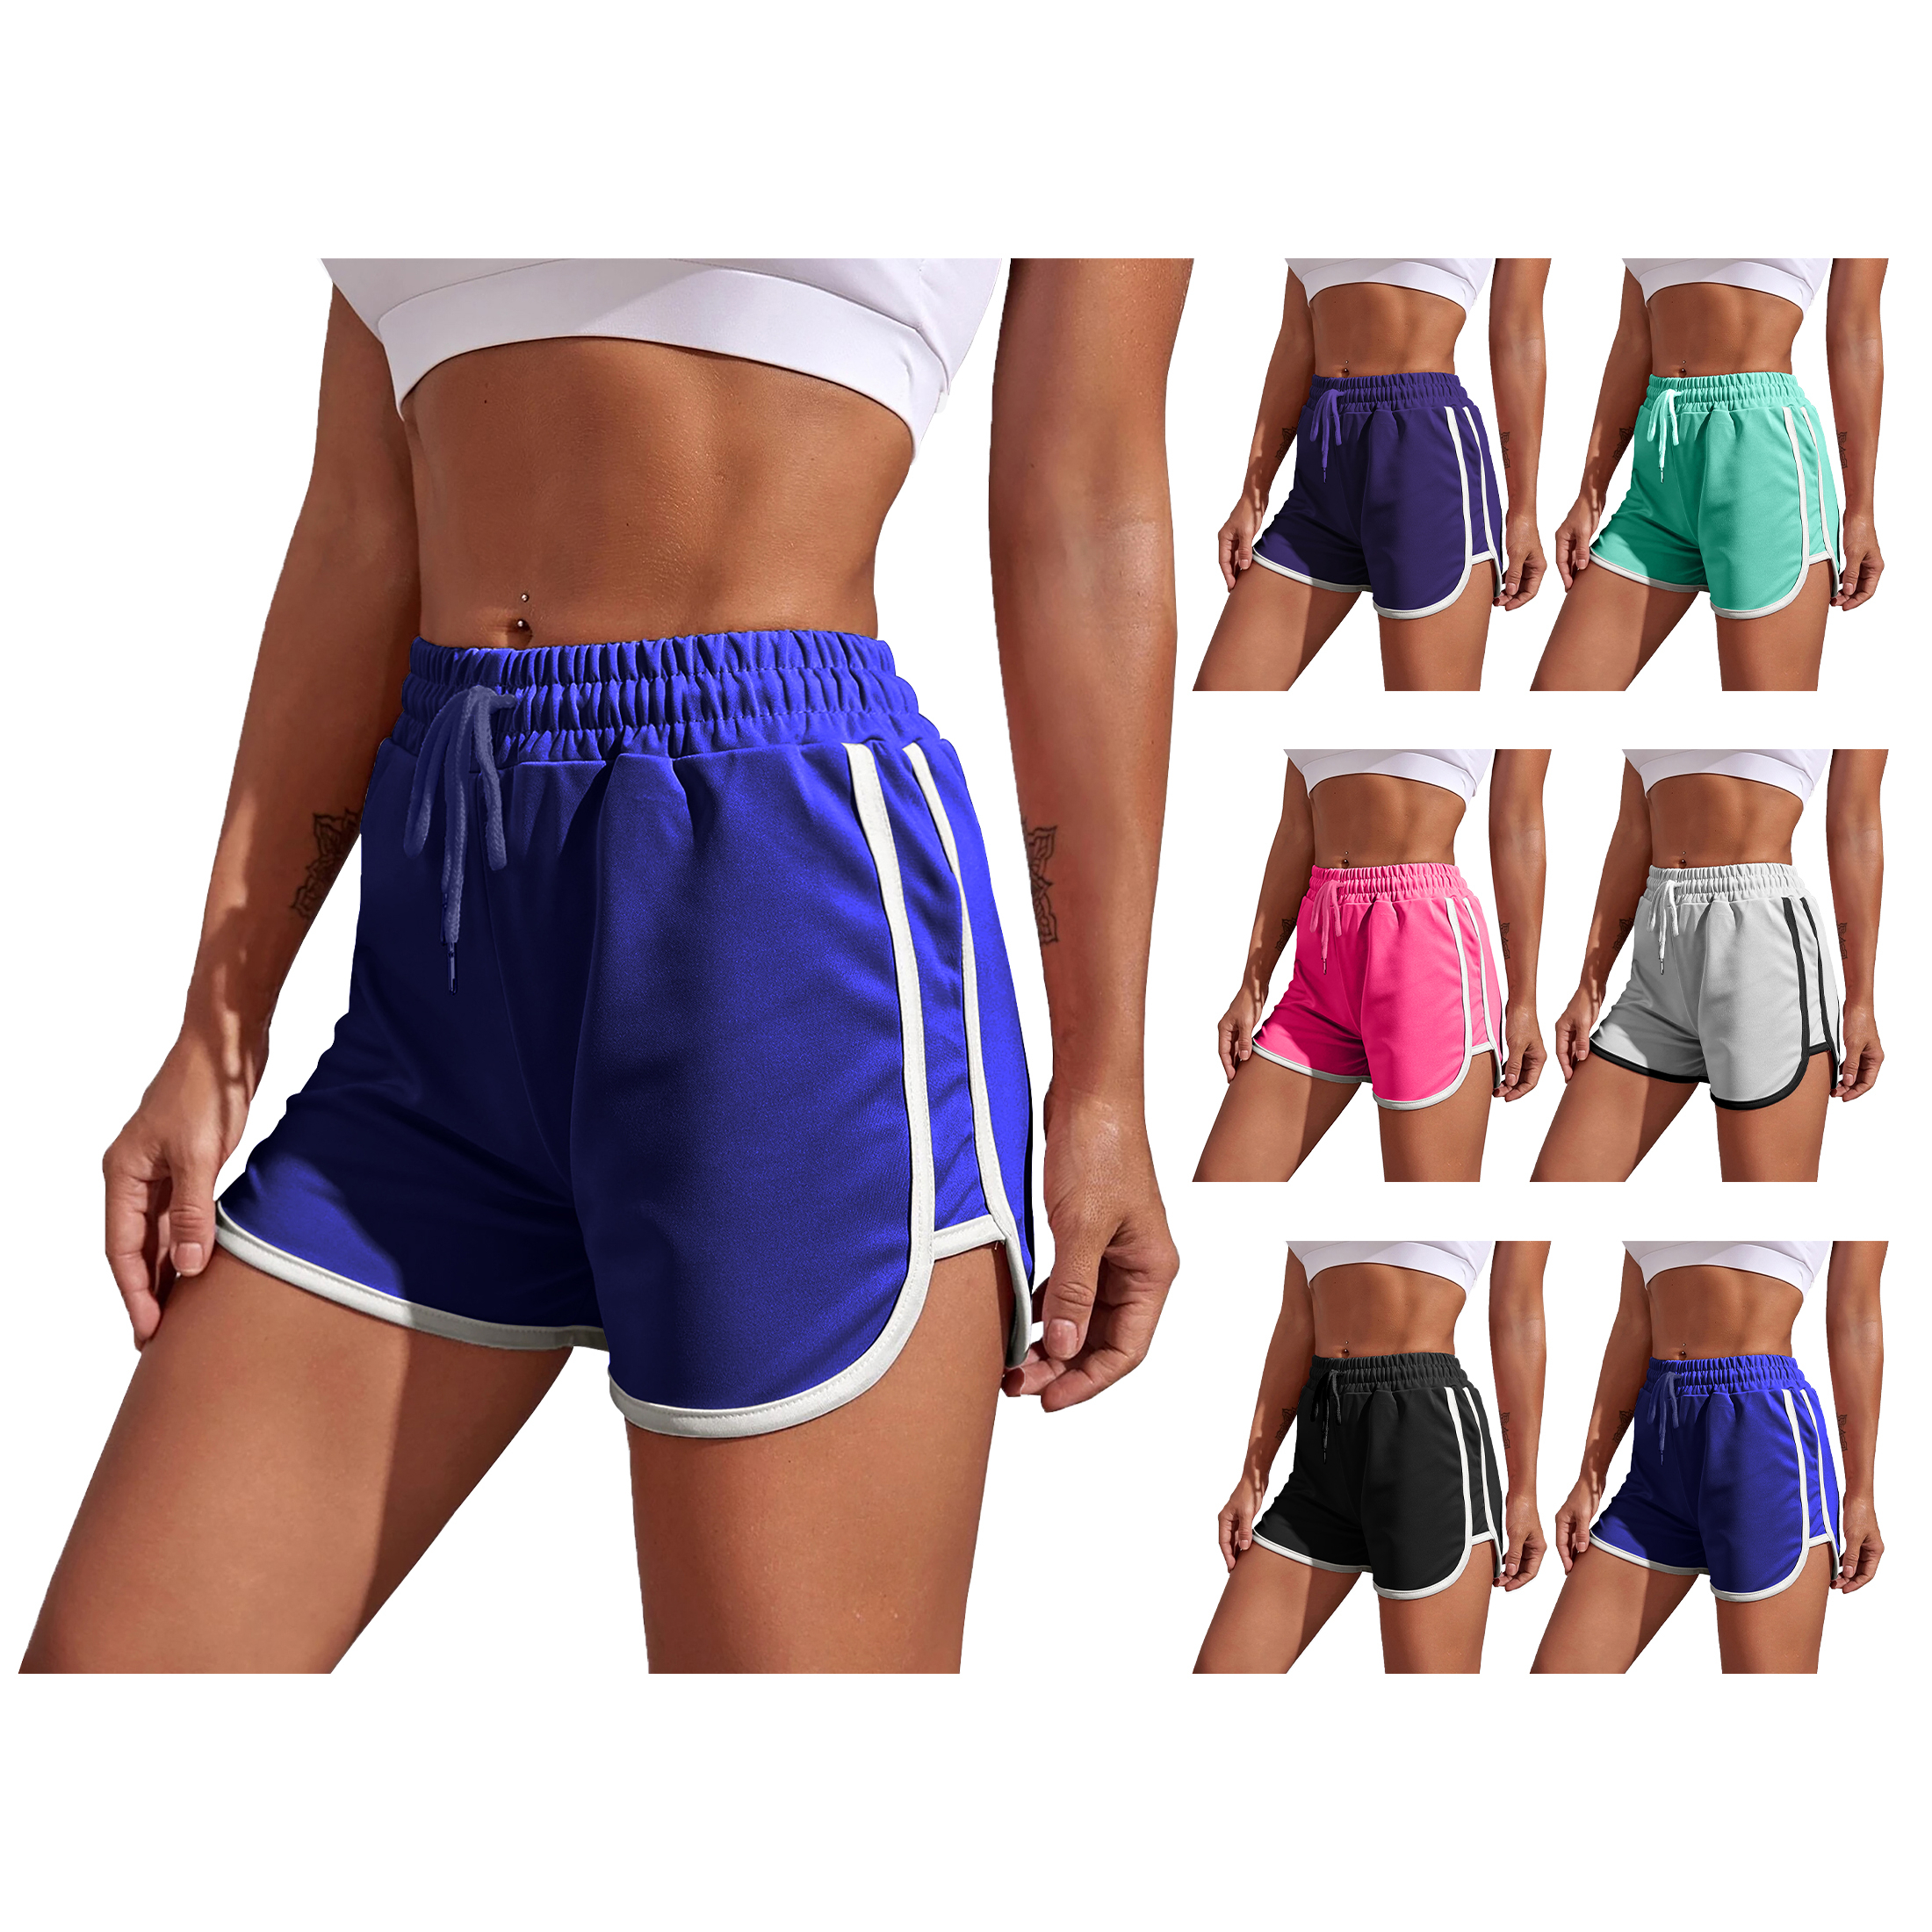 3-Pack Women's Dolphin Shorts Soft Comfy Elastic Waist Running Athletic Workout Yoga Pants - S